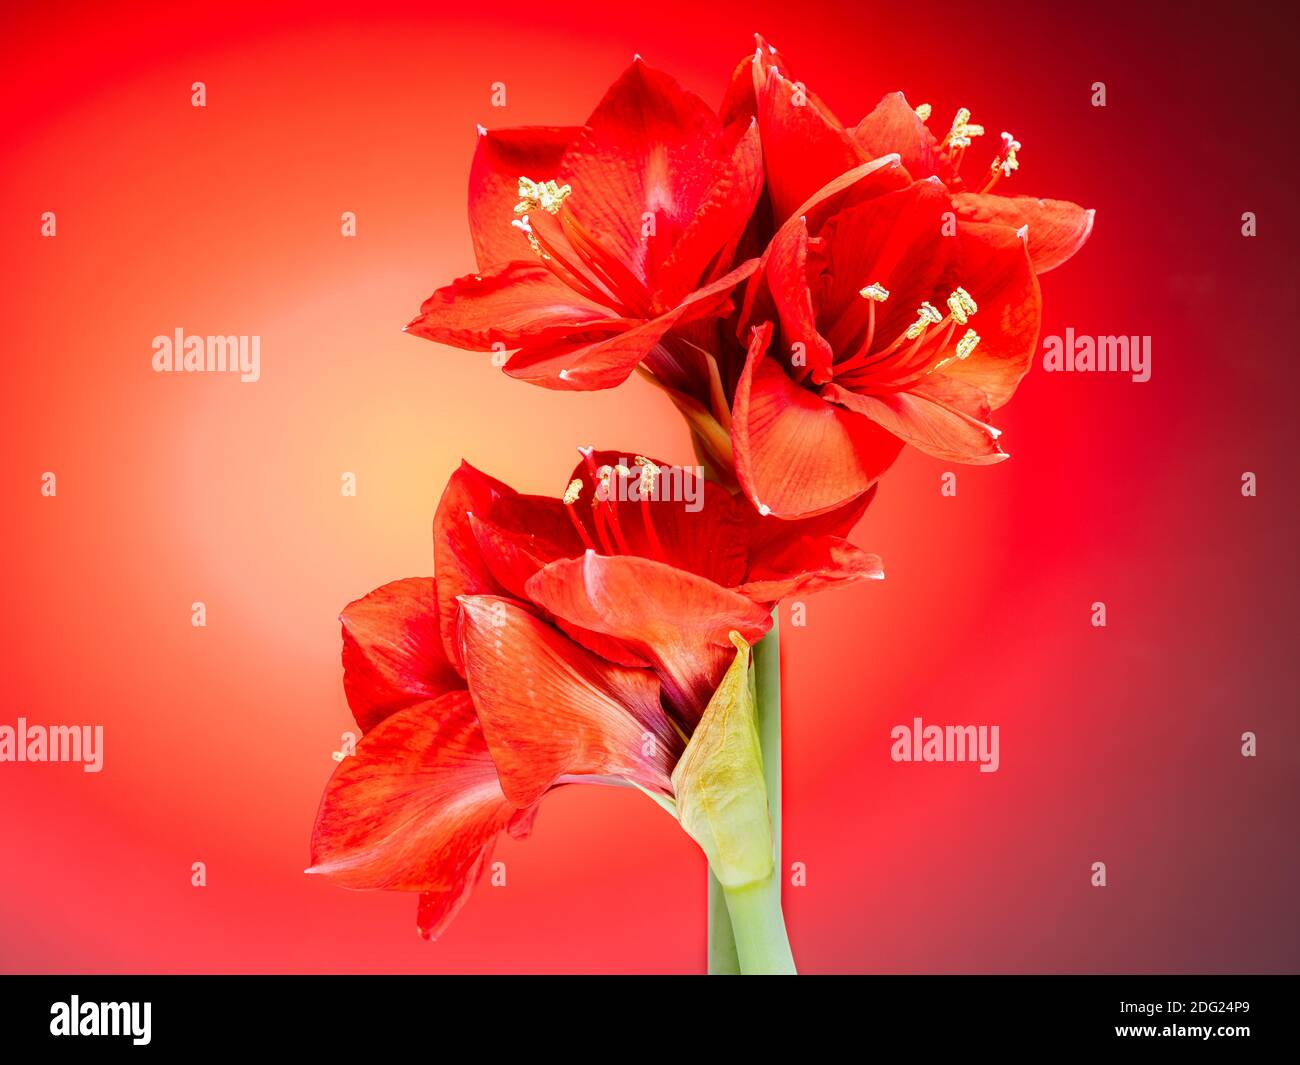 Beautiful Red Amaryllis Flowers Against a Red Background Stock Photo